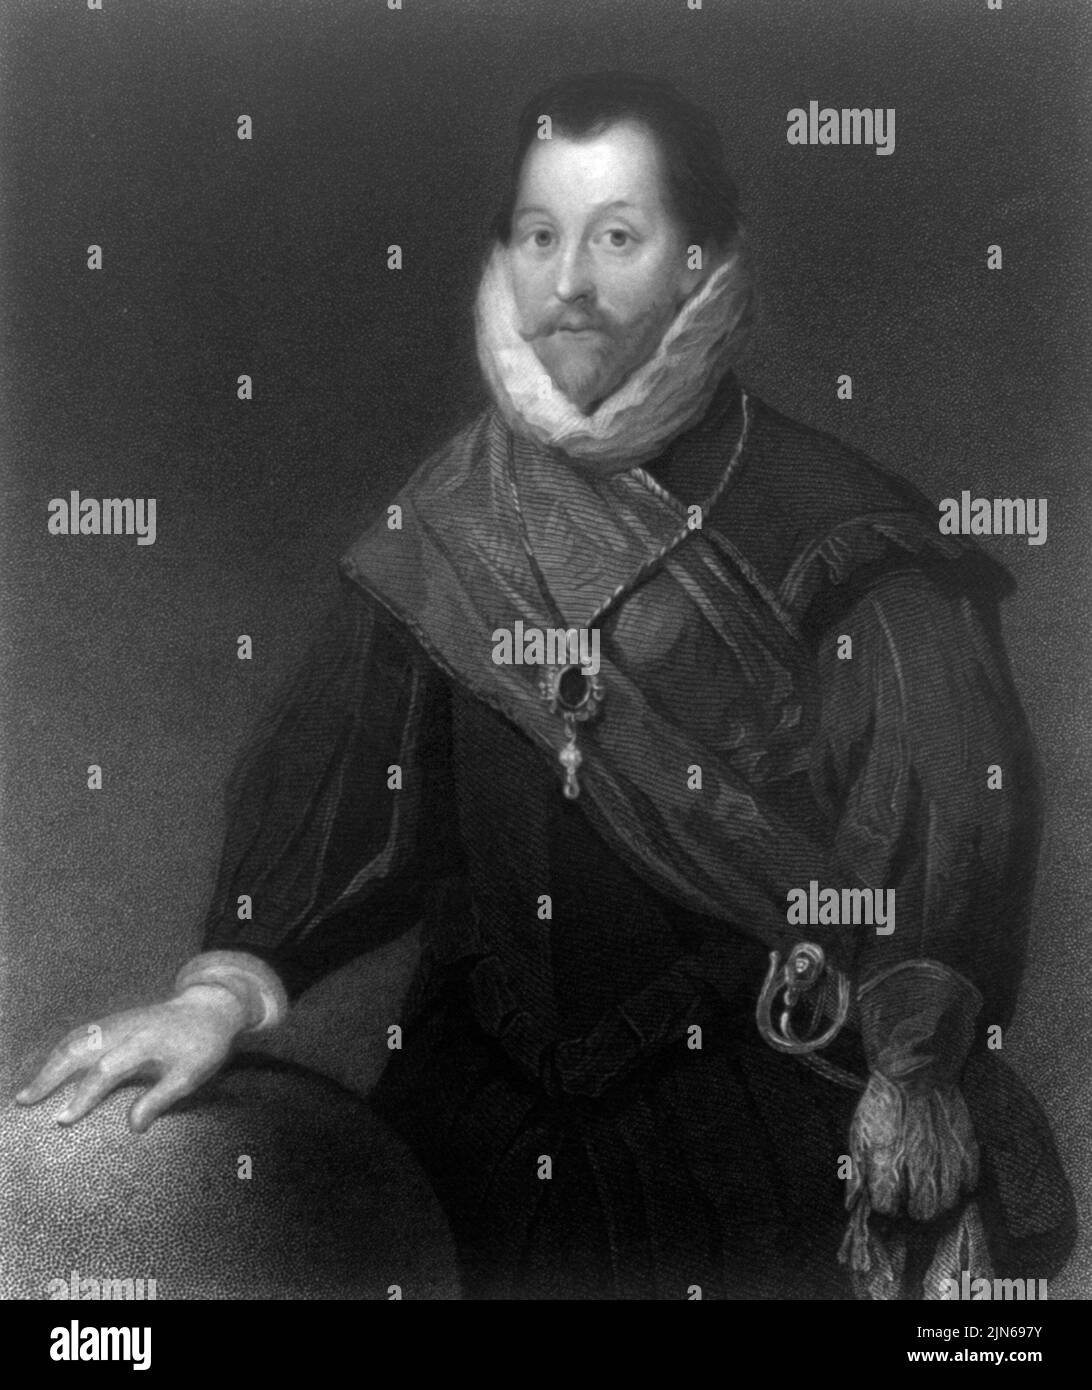 Portrait of Sir Francis Drake, the famous Elizabethan era admiral and infamous to many (particularly the Spanish) as a bucaneer -- Photo: Geopix Stock Photo